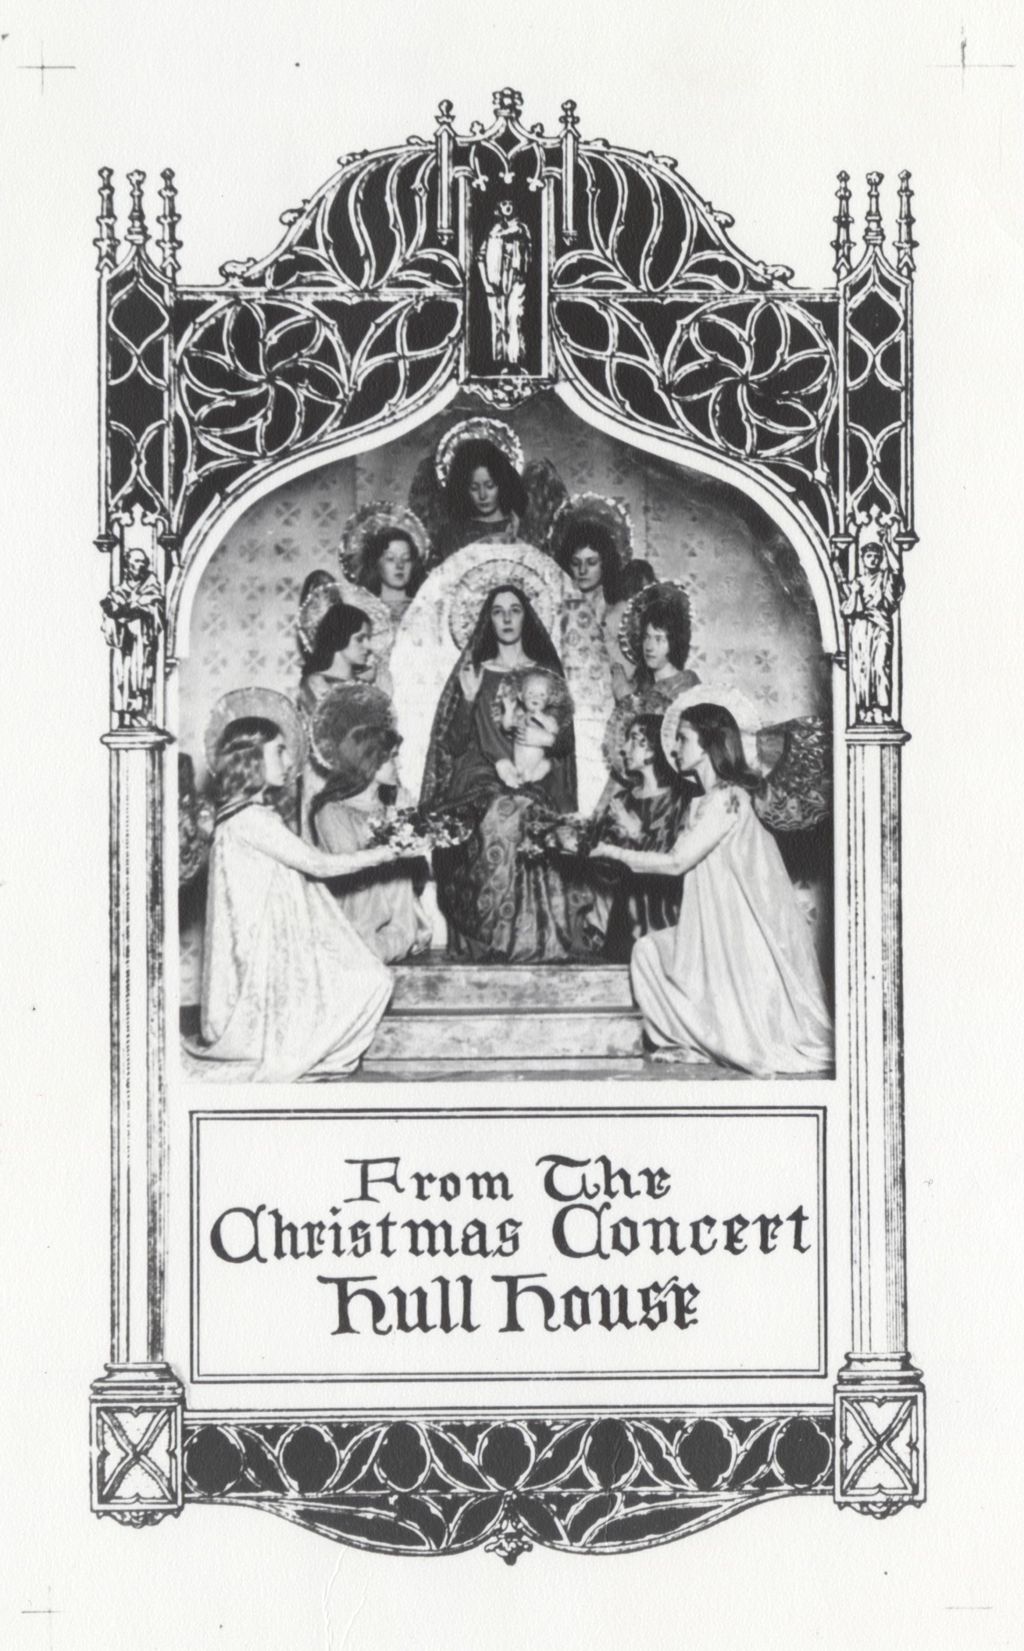 Miniature of Card "From the Christmas Concert Hull-House" with Christmas tableau